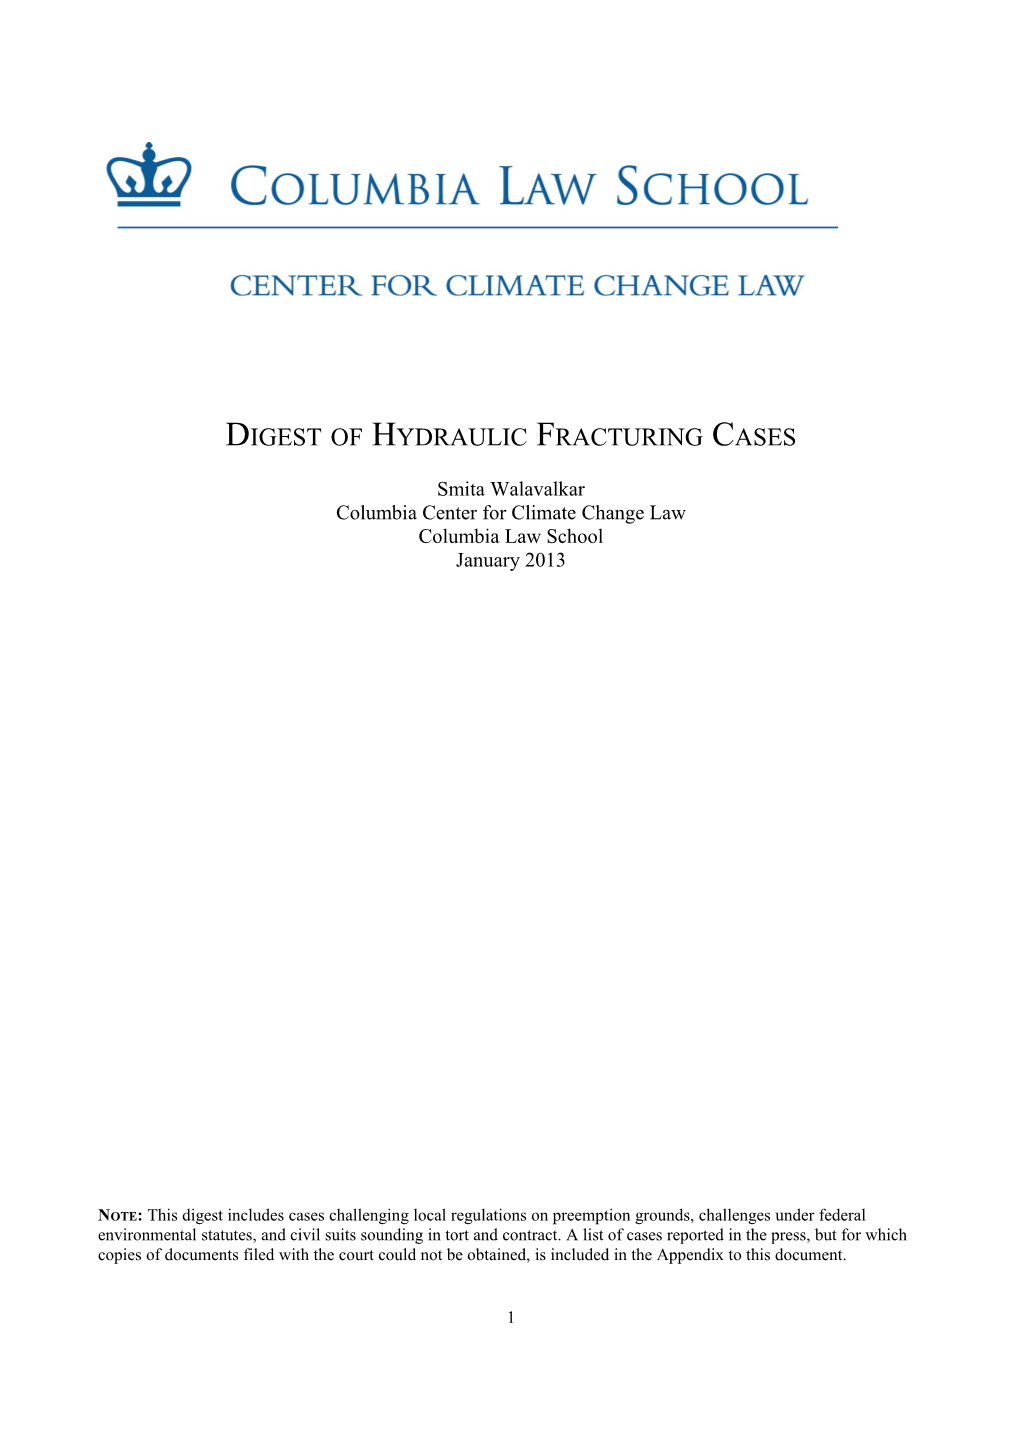 Digest of Hydraulic Fracturing Cases